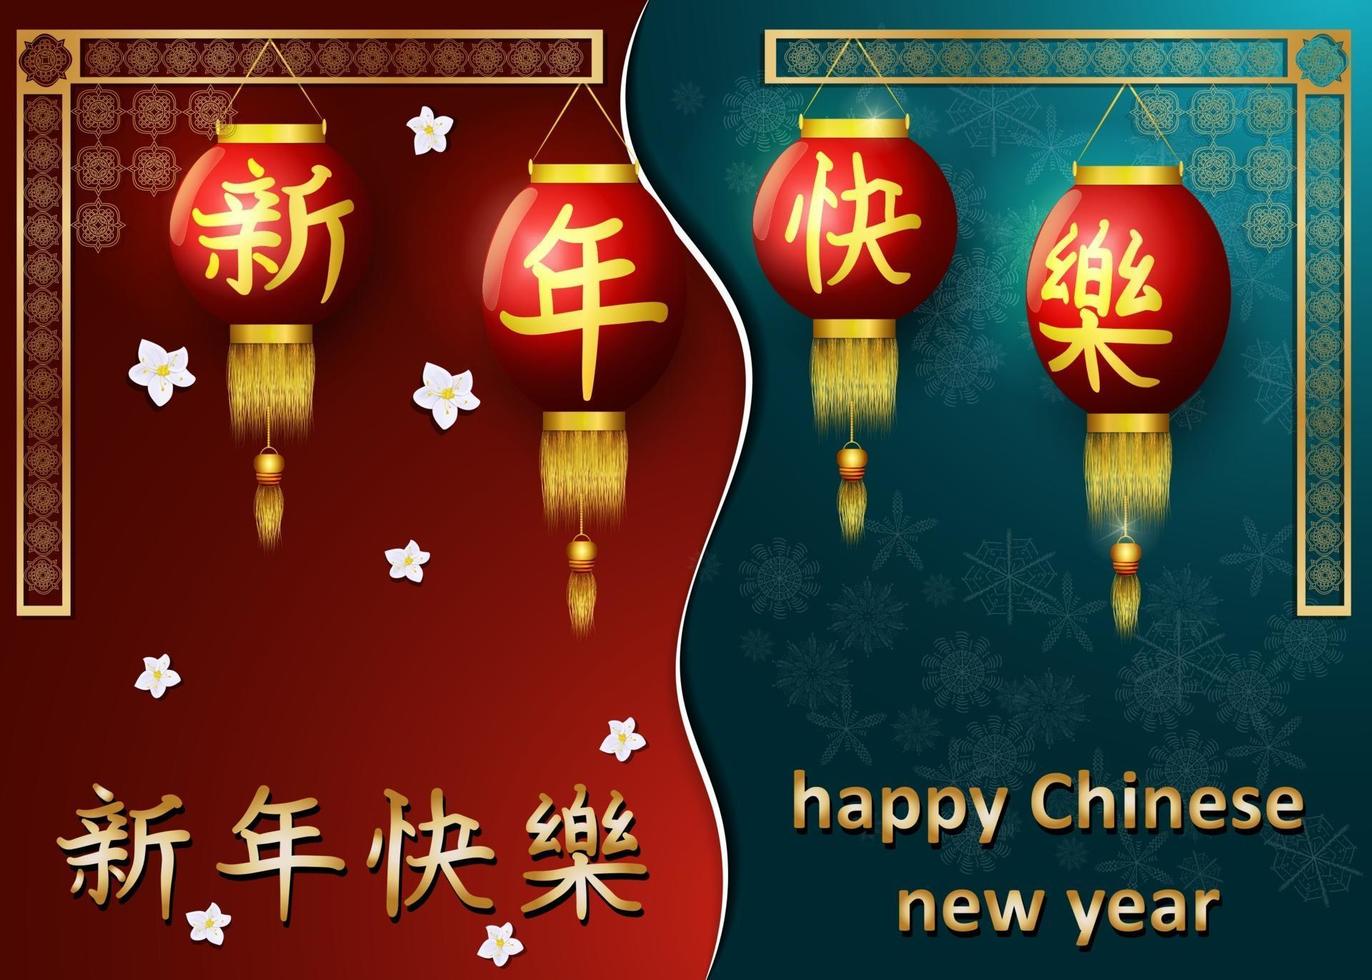 Chinese and European new year greeting card design vector